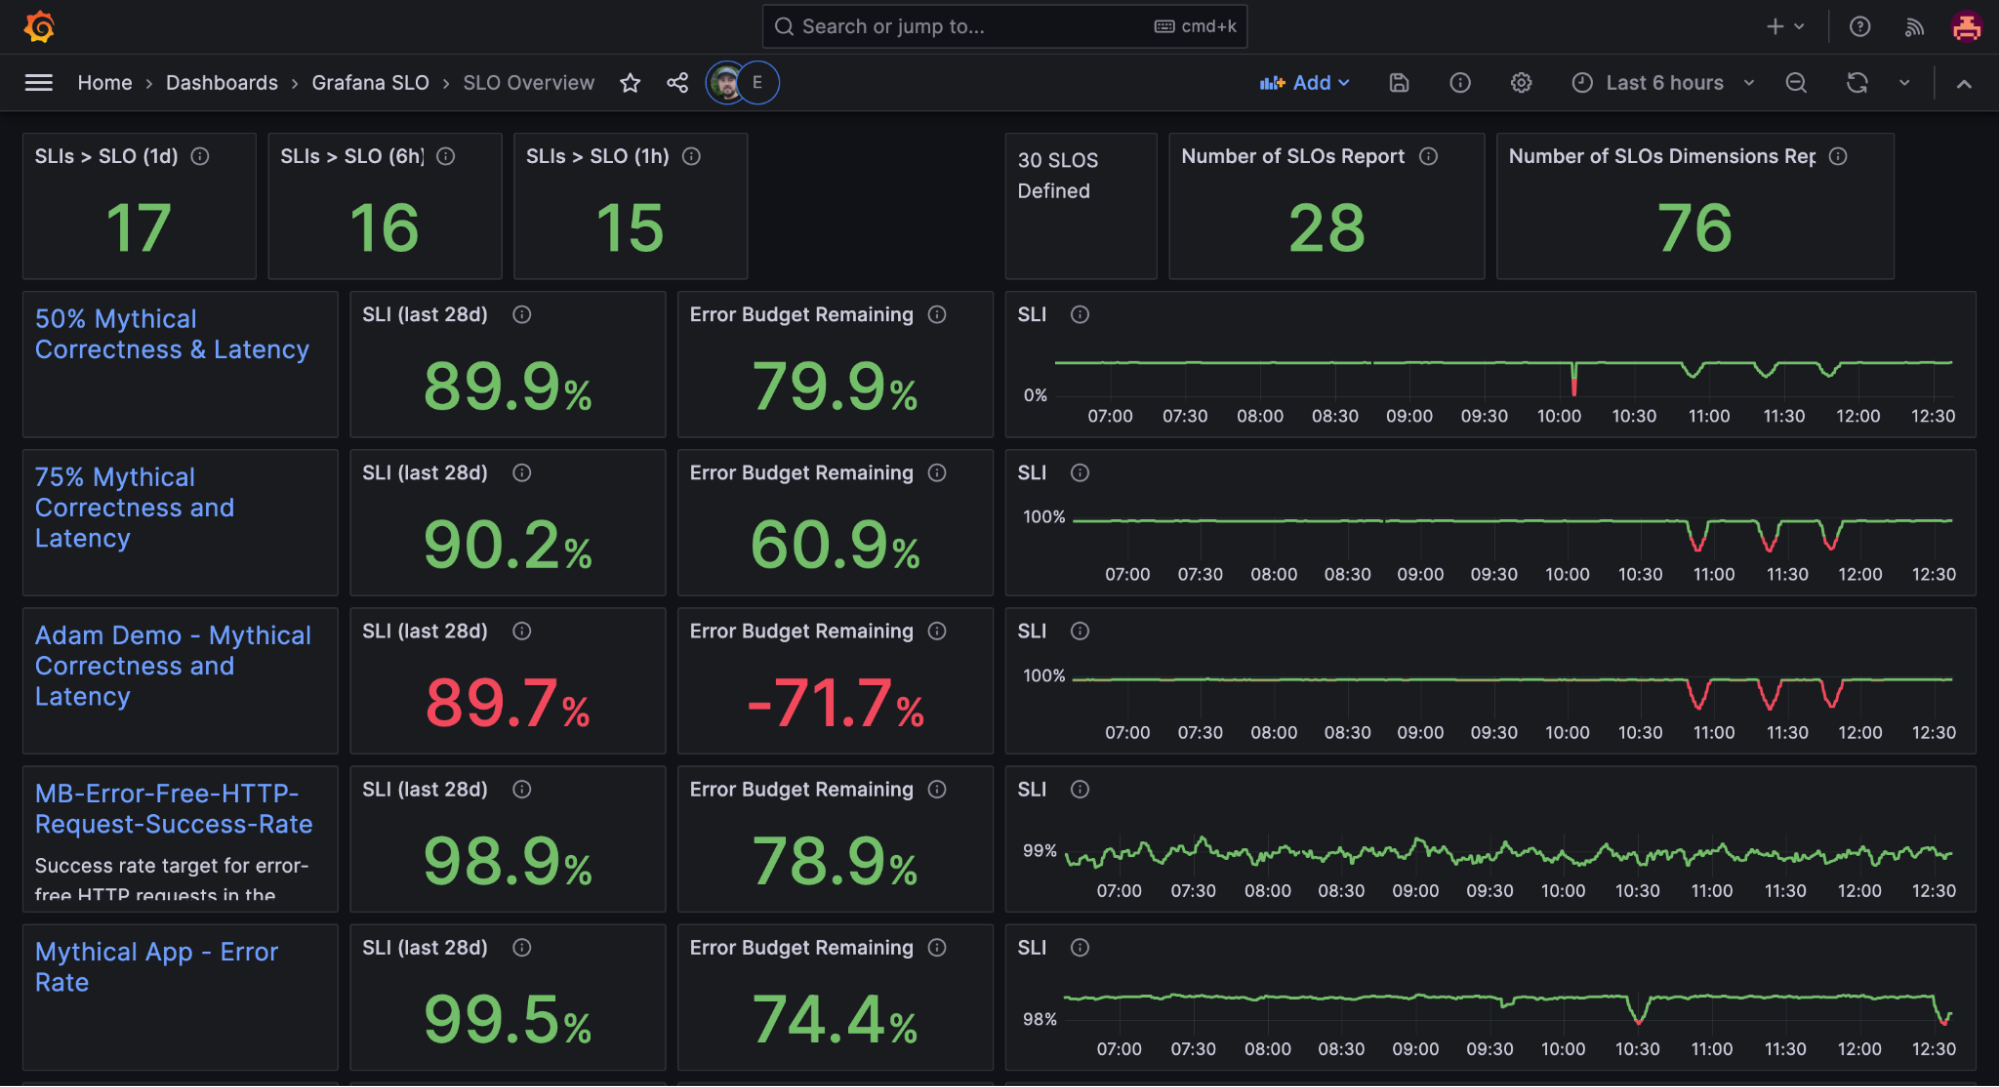 Service level objectives overview in Grafana SLO. 